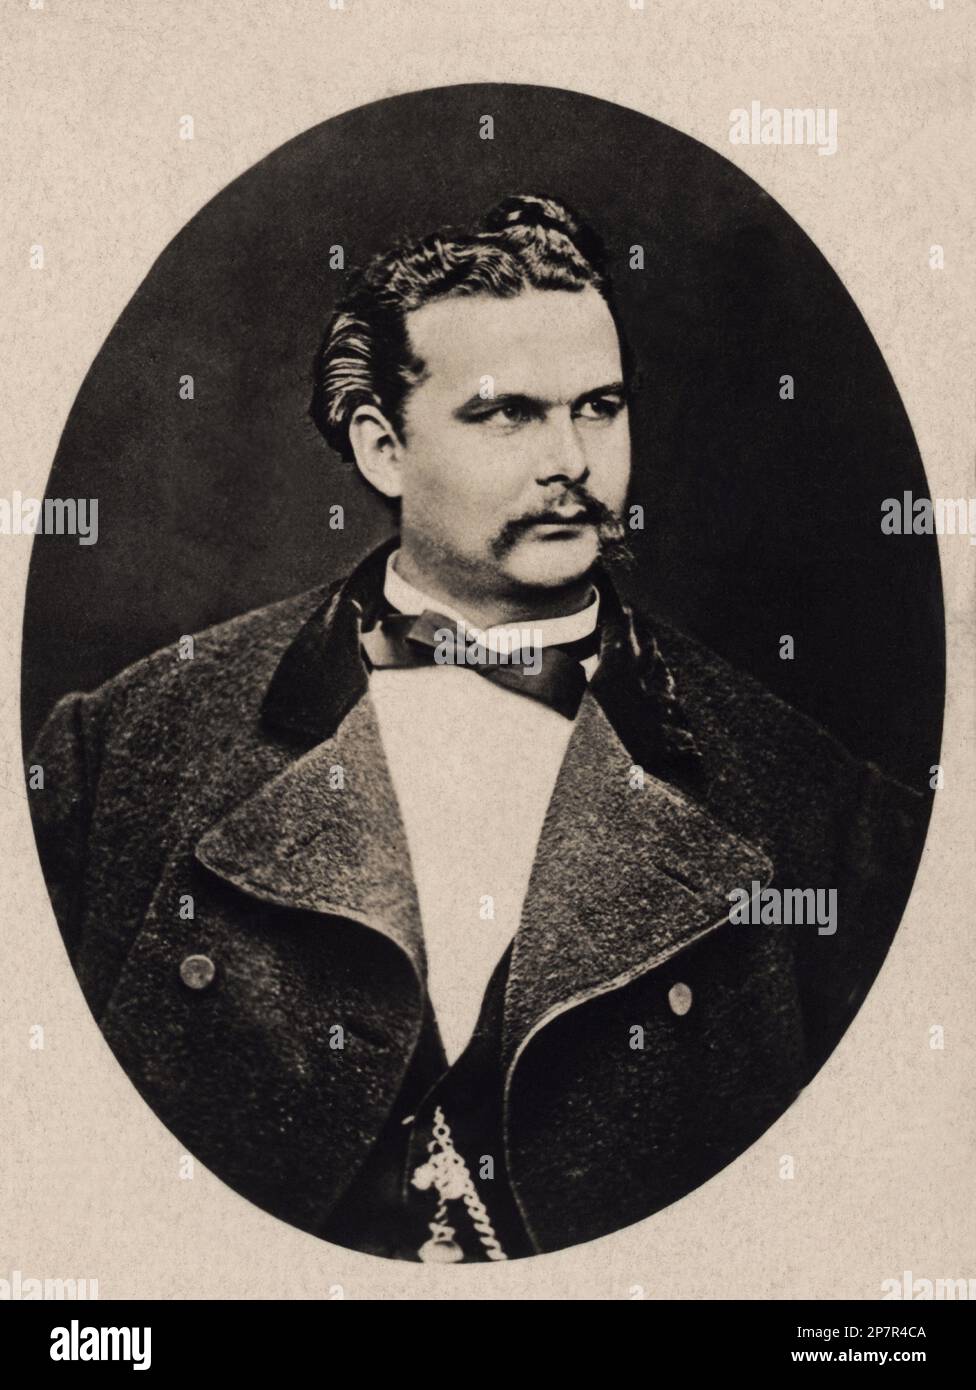 1875 ca , Bavaria , GERMANY  : A portrait of younk King von Bayer LUDWIG II ( Louis ) of Wittelsbach  , King of Bavaria , known as ' Mad King Ludwig '  ( 1845 – 1886 ).  King of Bavaria from 1864 until his death. -  RE - REALI - ROYALTY - nobili - nobiltà - BAVIERA - music - classical - musica classica - portrait - ritratto - GAY - homosexual - homosexuality - omosessuale - omosessualità - LGBT - suicida - suicidio - german nobility  - NOBILITY - NOBILI - NOBILTA' - REALI - ROYALTY  - BAVIERA - GERMANIA  - cravatta - papillon - tie bow - collar - colletto - baffi - moustache - coat - cappotto Stock Photo